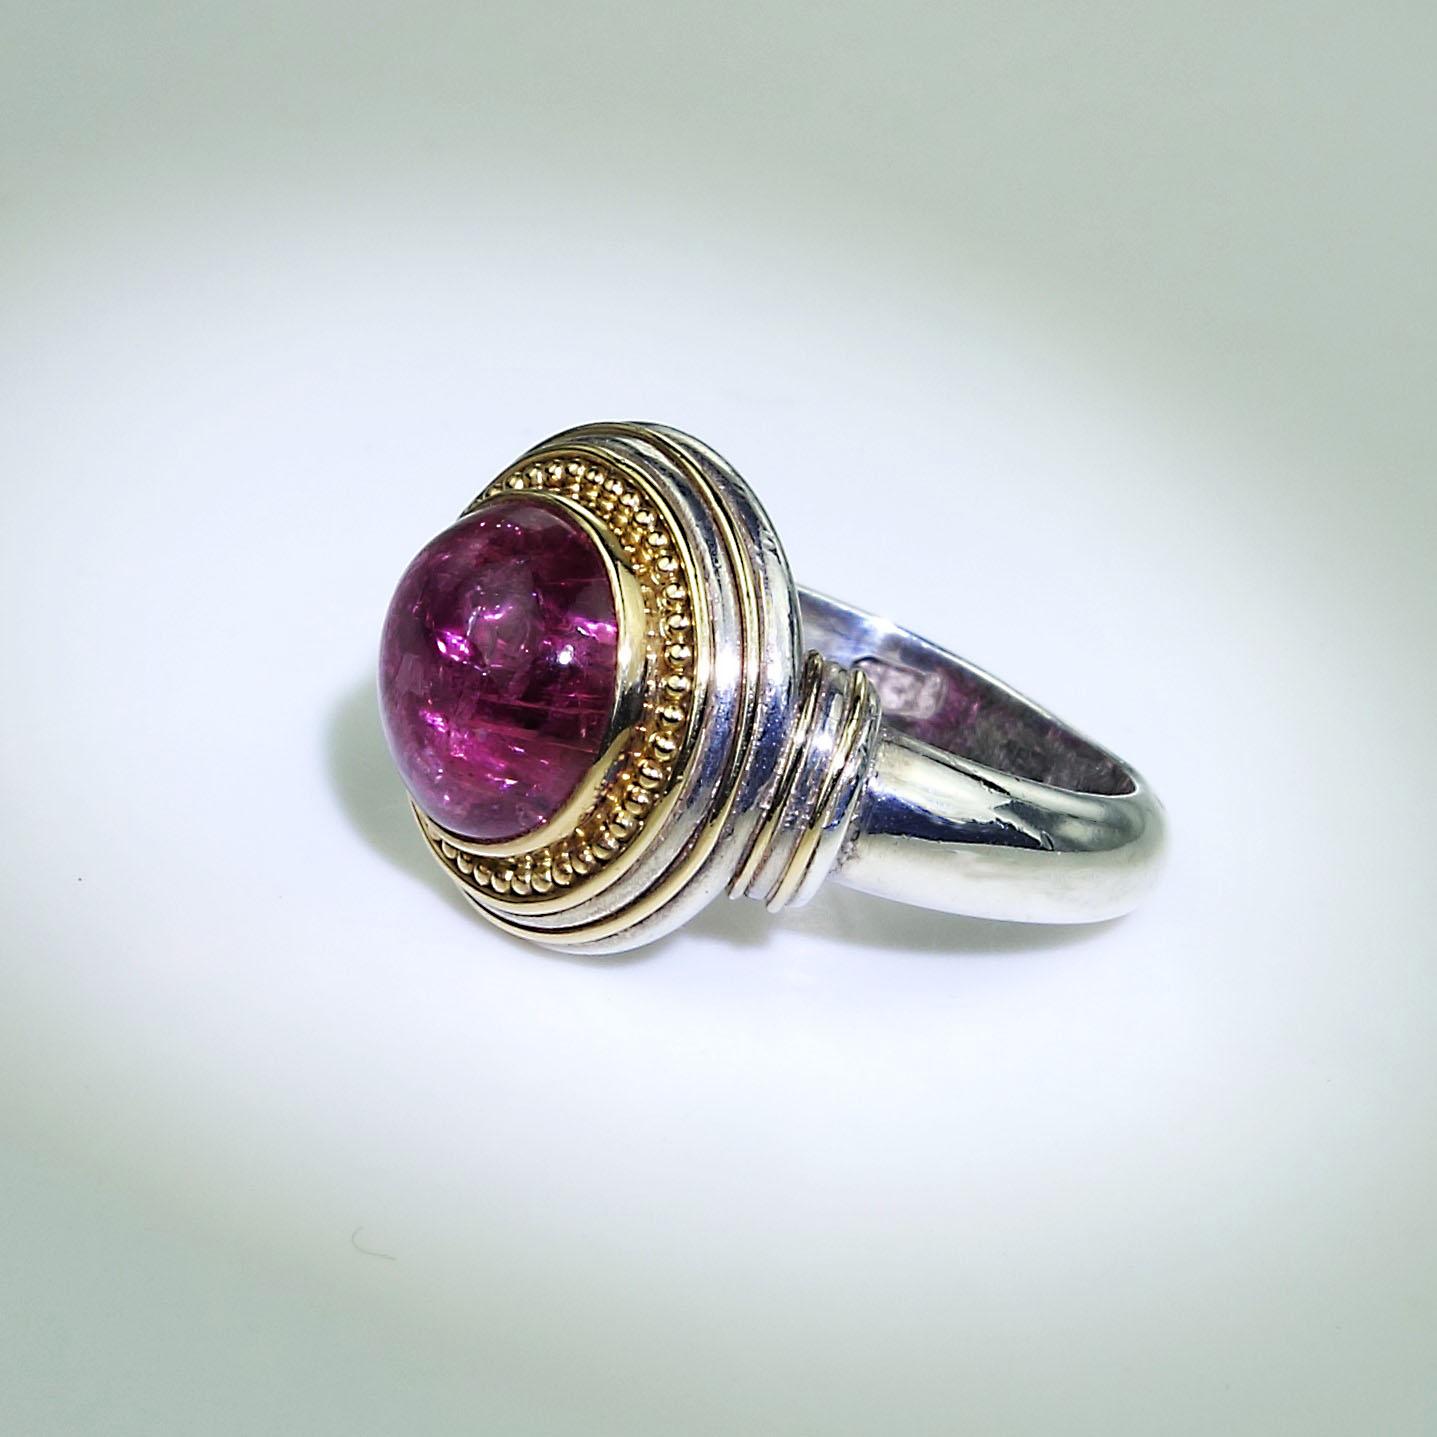 Gorgeous Round Pink Tourmaline Cabochon bezel set in 18K yellow gold with beaded accents set in a Sterling Silver ring.  A Steven Battelle ring.  The sparkling Pink Tourmaline Cabochon has the typical inclusions which increase the sparkle.  Size 7
